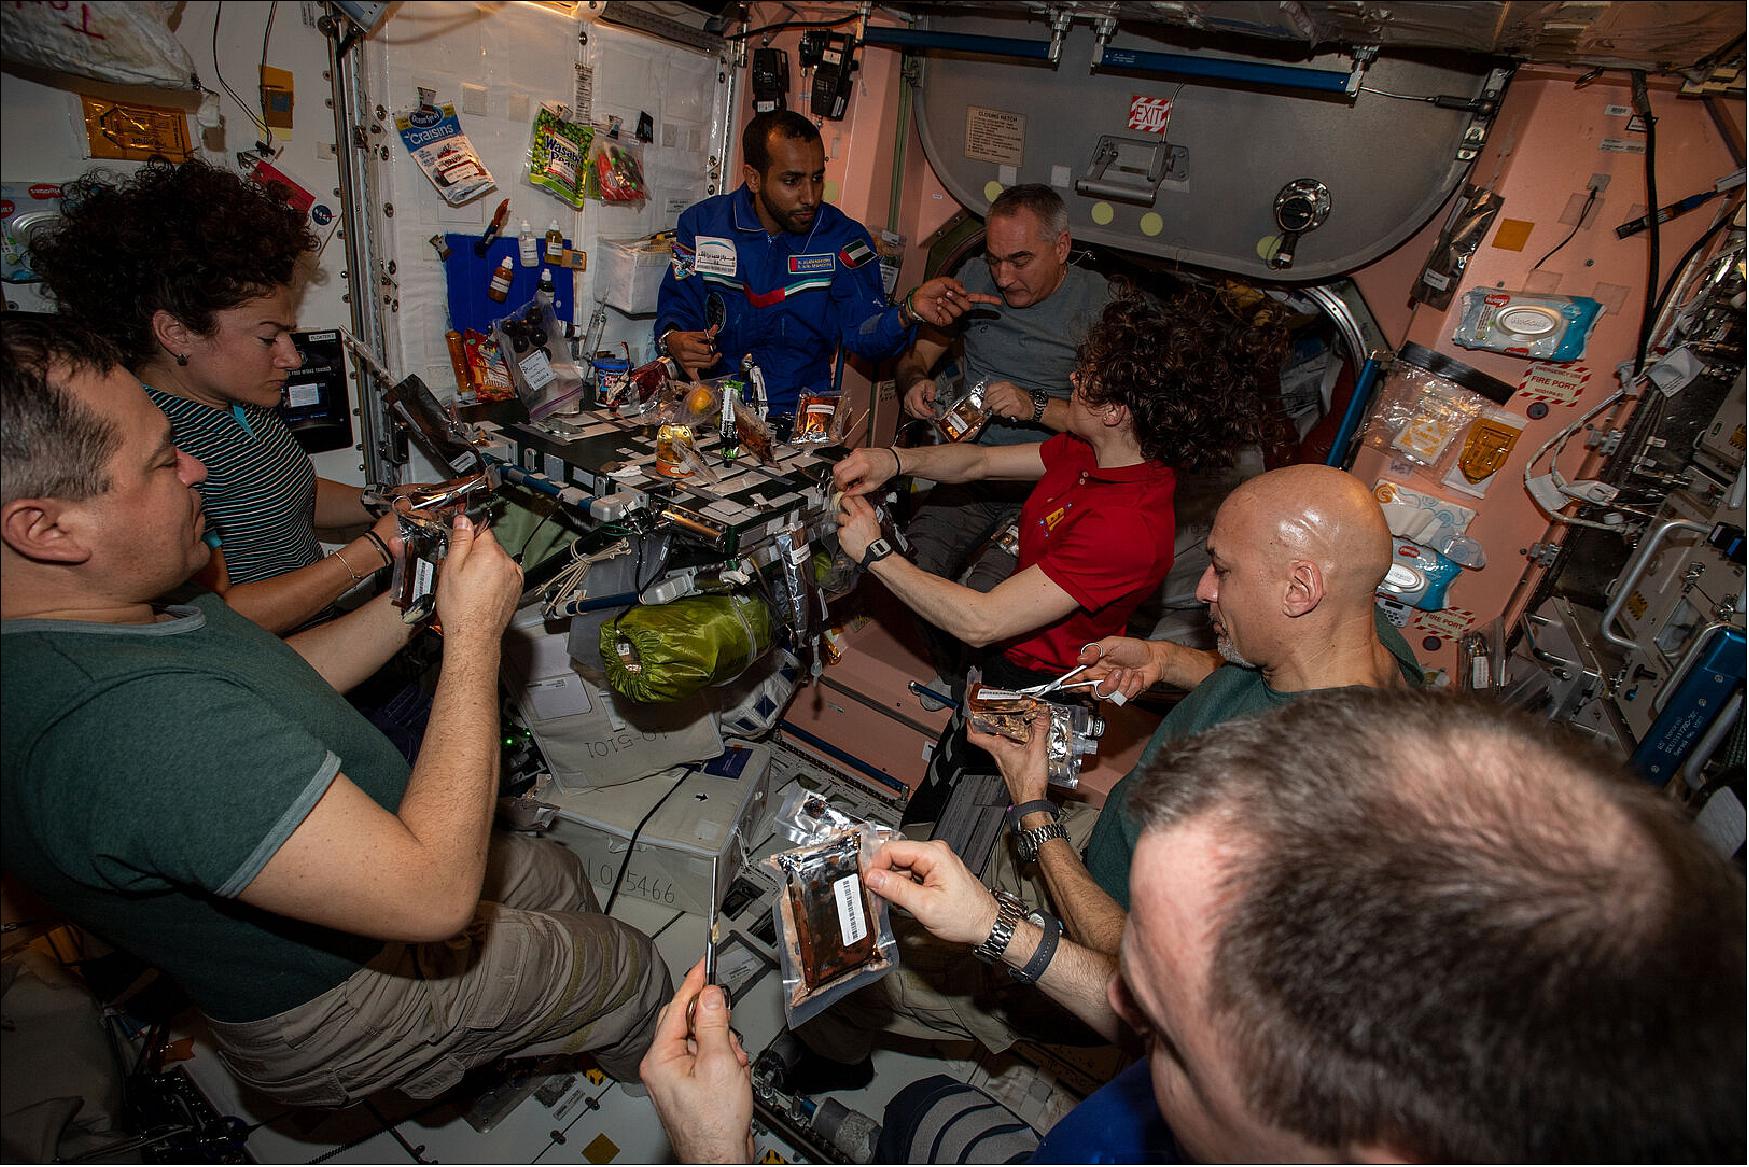 Figure 6: When Earth is so far away, it helps to have friends nearby. The usual six-astronaut crew of the ISS welcomed three more and a cargo vehicle September 2019, making for a full house on the orbital outpost. The arrival of NASA astronaut Jessica Meir, Russian cosmonaut Oleg Skripochka and the first United Arab Emirates (UAE) astronaut Hazza Al Mansouri on 25 September was followed by the Japanese HTV-8 space freighter the next day, bringing over four tonnes of supplies and fresh science. - With nine people on board, the Space Station was even busier and nosier than usual, including at mealtimes. This image was taken of the team gathered for a celebratory dinner in the Russian Zvezda module, the food preparation area of the Space Station. - Astronauts try to maintain a routine that includes social time to unwind and build camaraderie. This is especially important in a multicultural environment. A total of 239 people from 19 countries have visited the space home, and as of Luca’s current mission Beyond, there are 4 nationalities on board (image credit: NASA) 3)